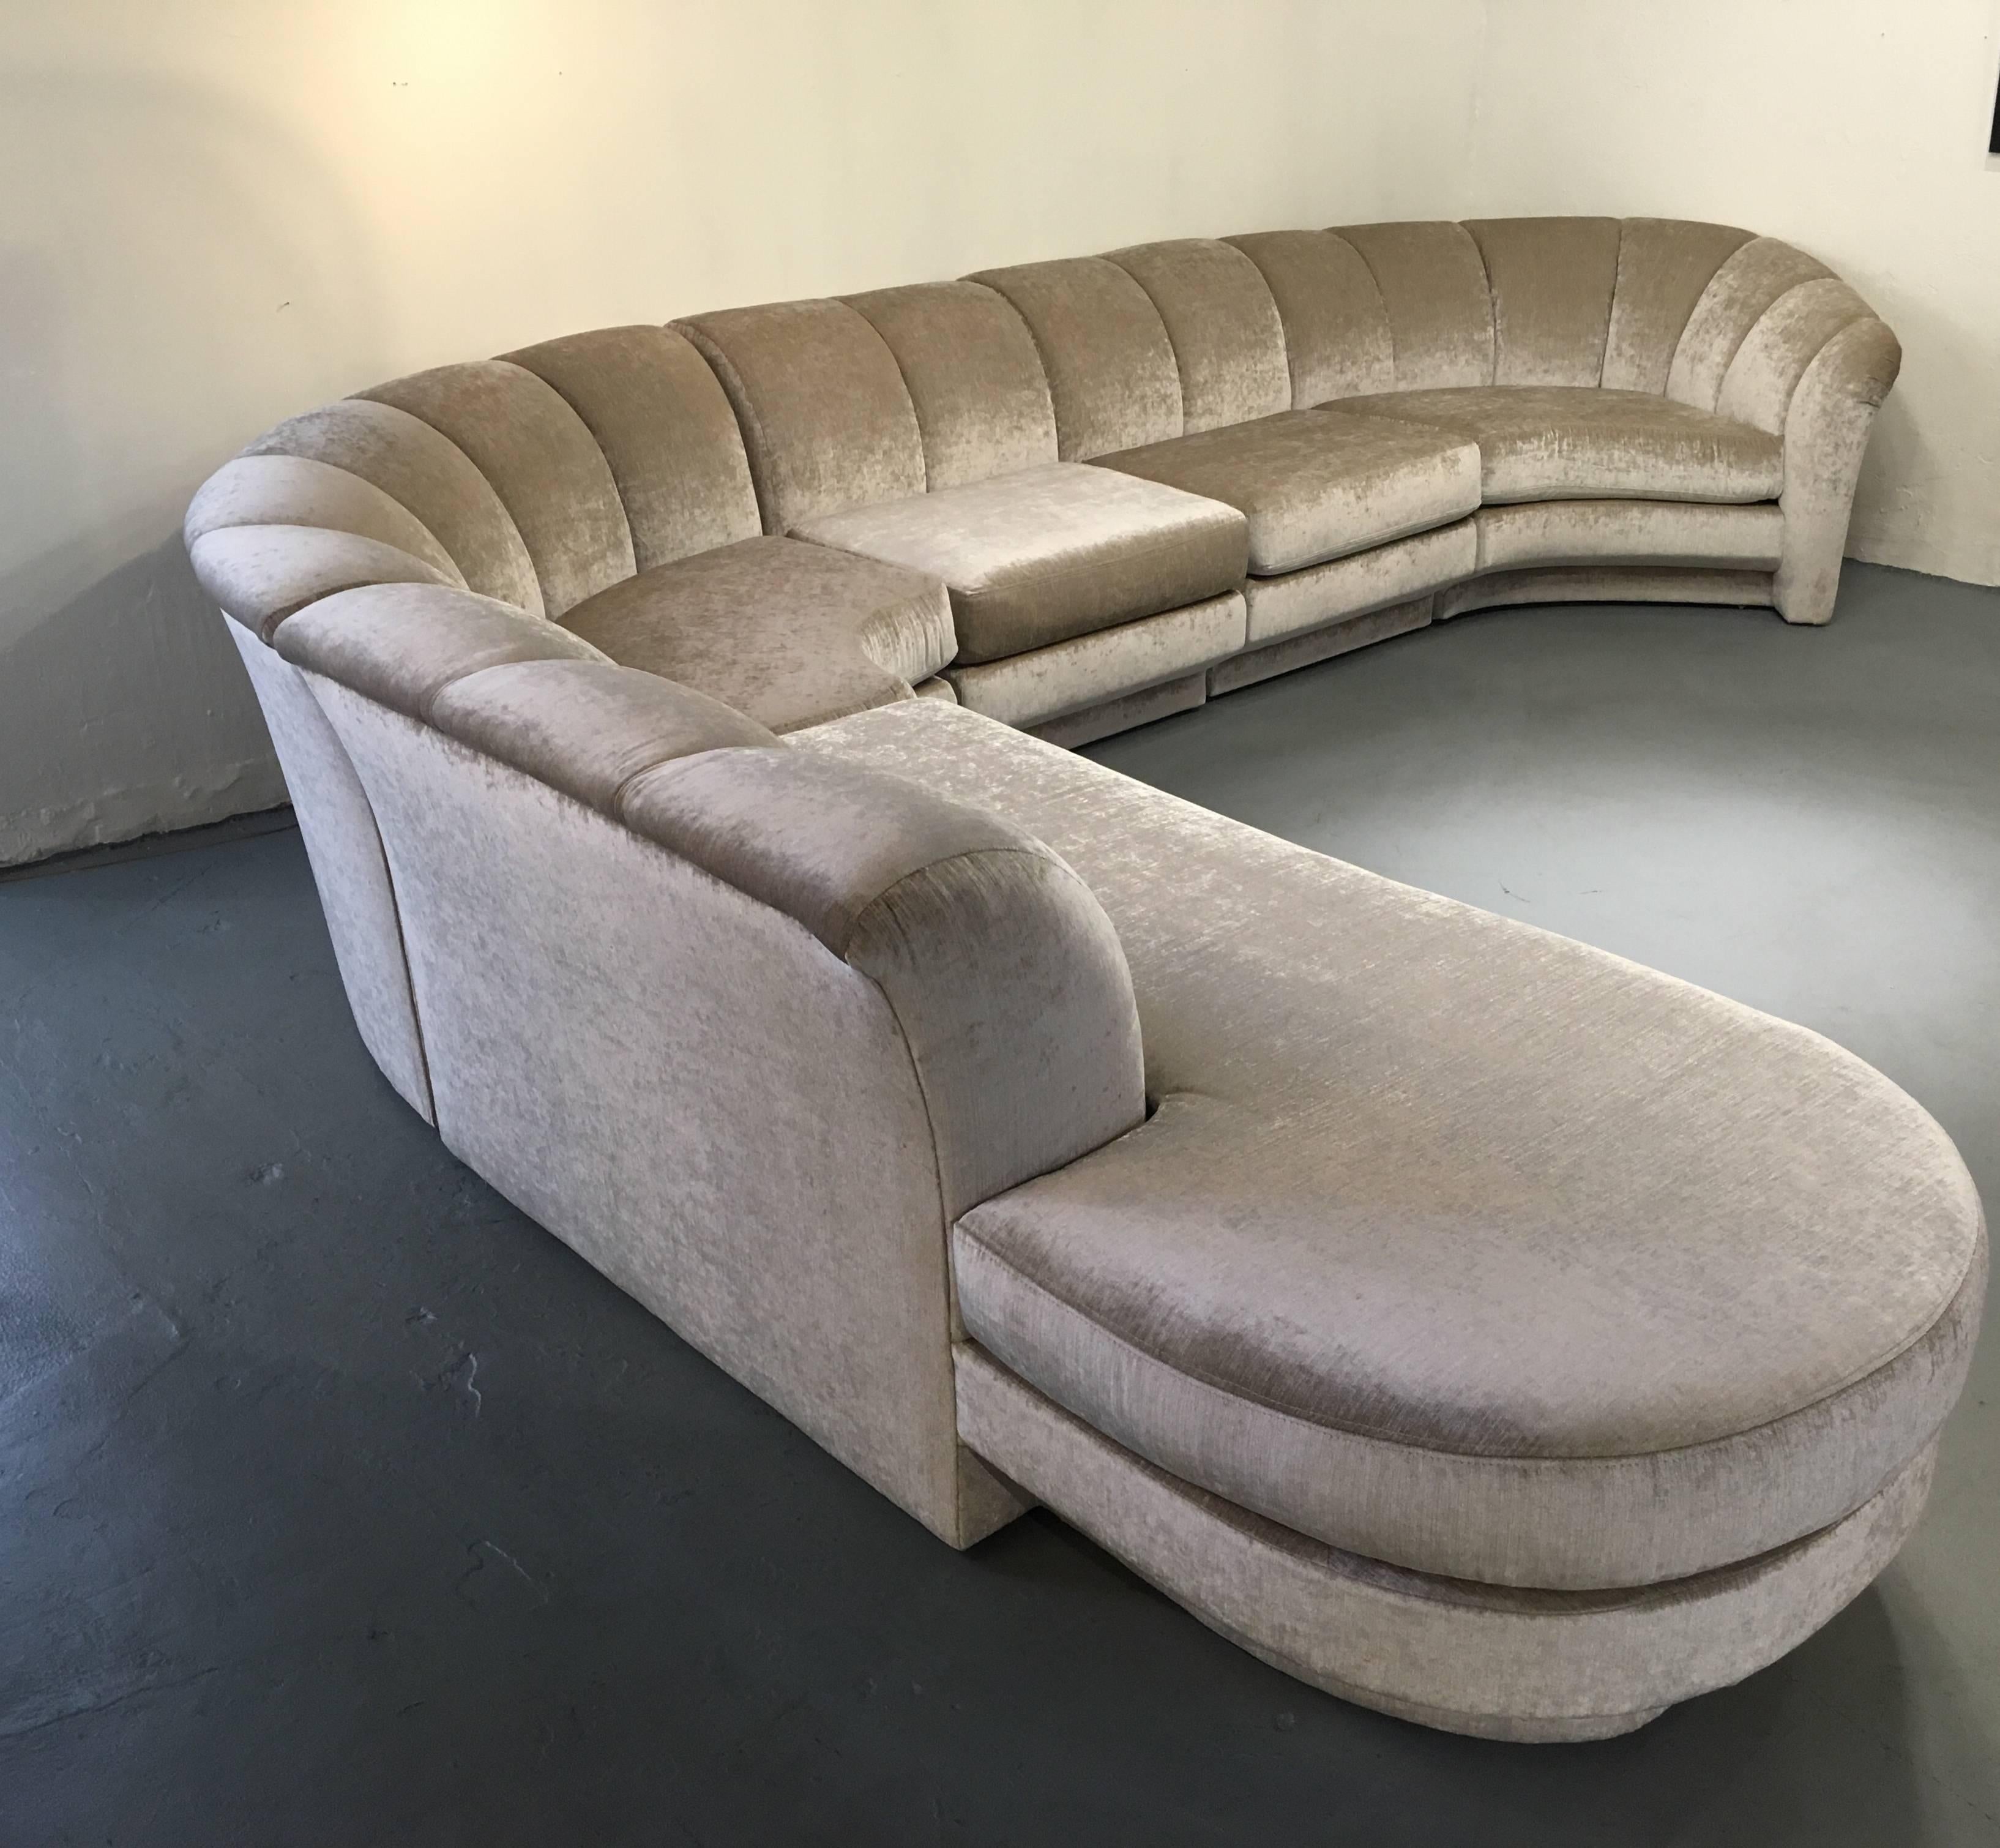 Five-Piece Sectional Sofa by Milo Baughman for Thayer Coggin 1